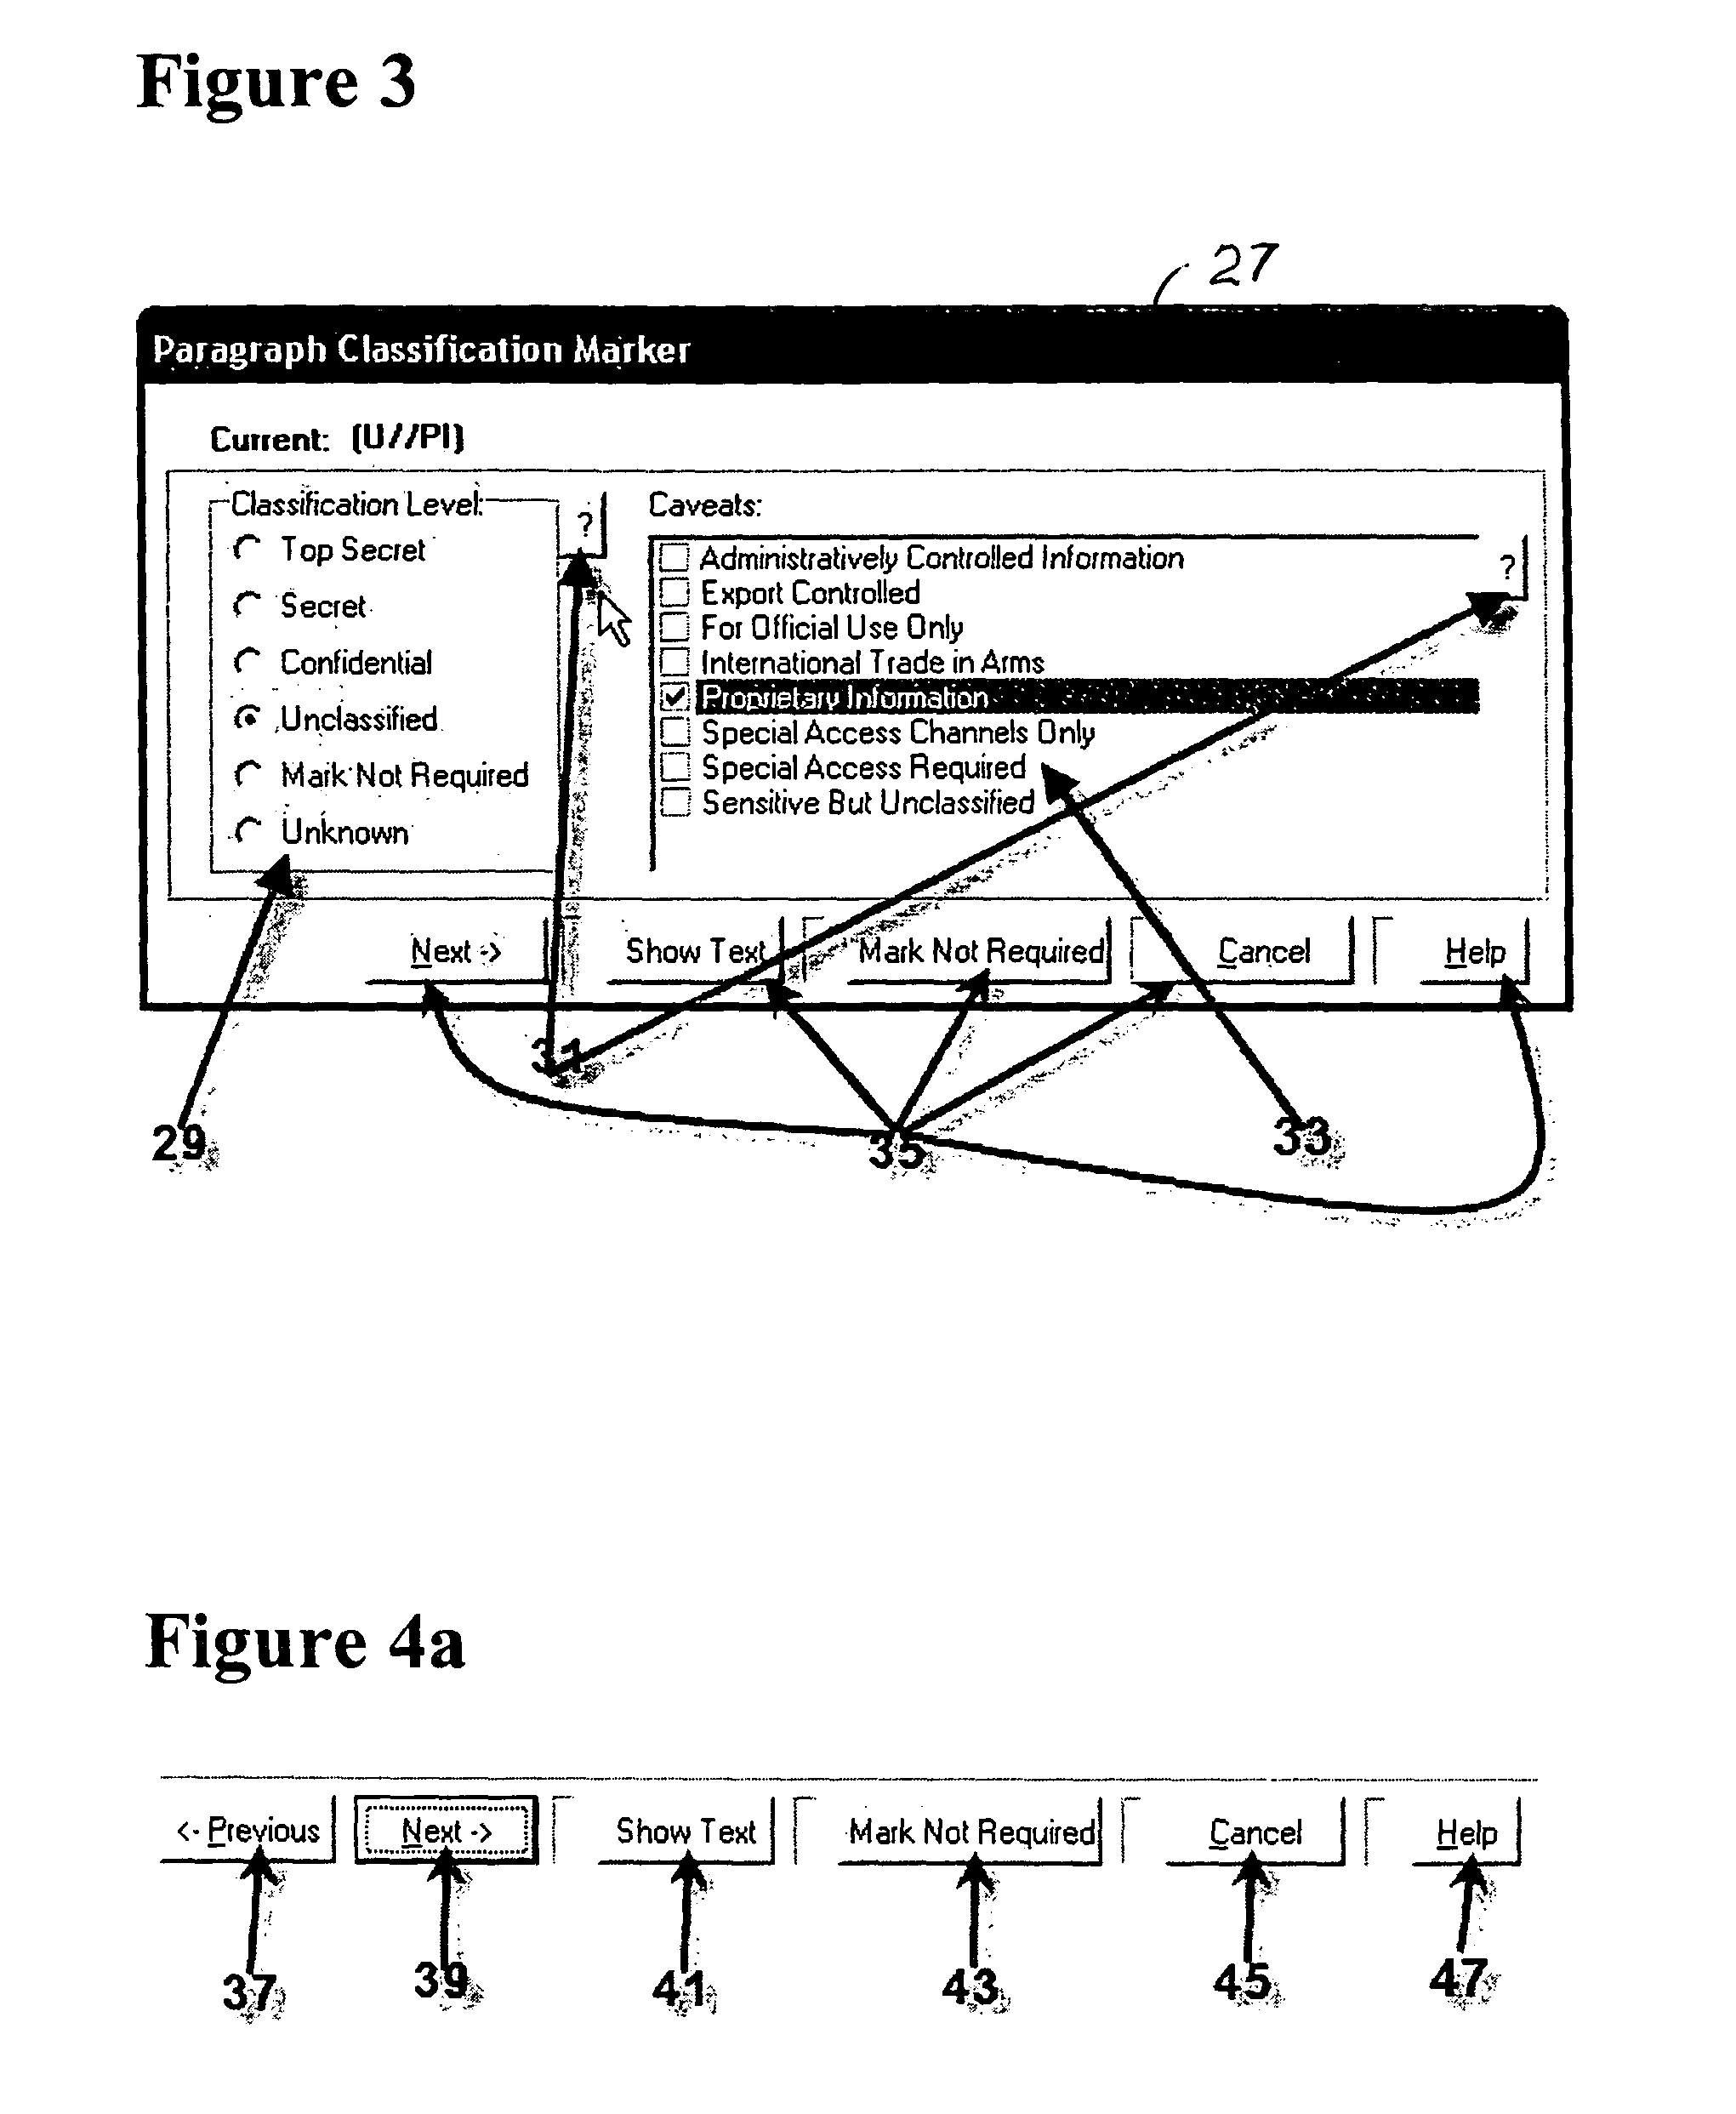 Method for providing customized and automated security assistance, a document marking regime, and central tracking and control for sensitive or classified documents in electronic format